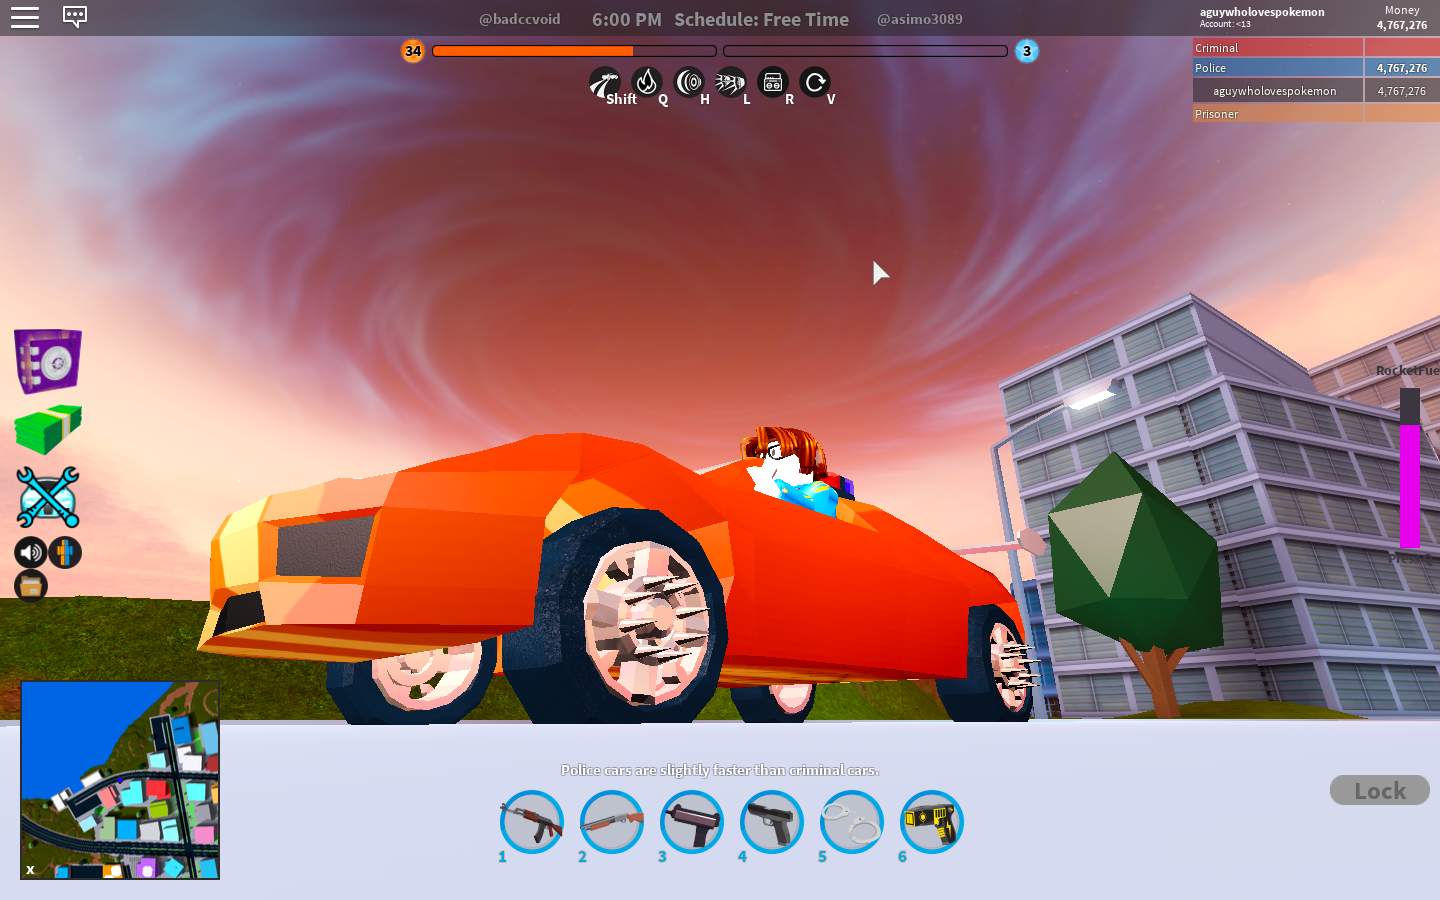 Hey Guys I Found This Big Black Hole Hurricane Thing In The Sky So What Is It Fandom - asimo3089 roblox jailbreak wallpaper